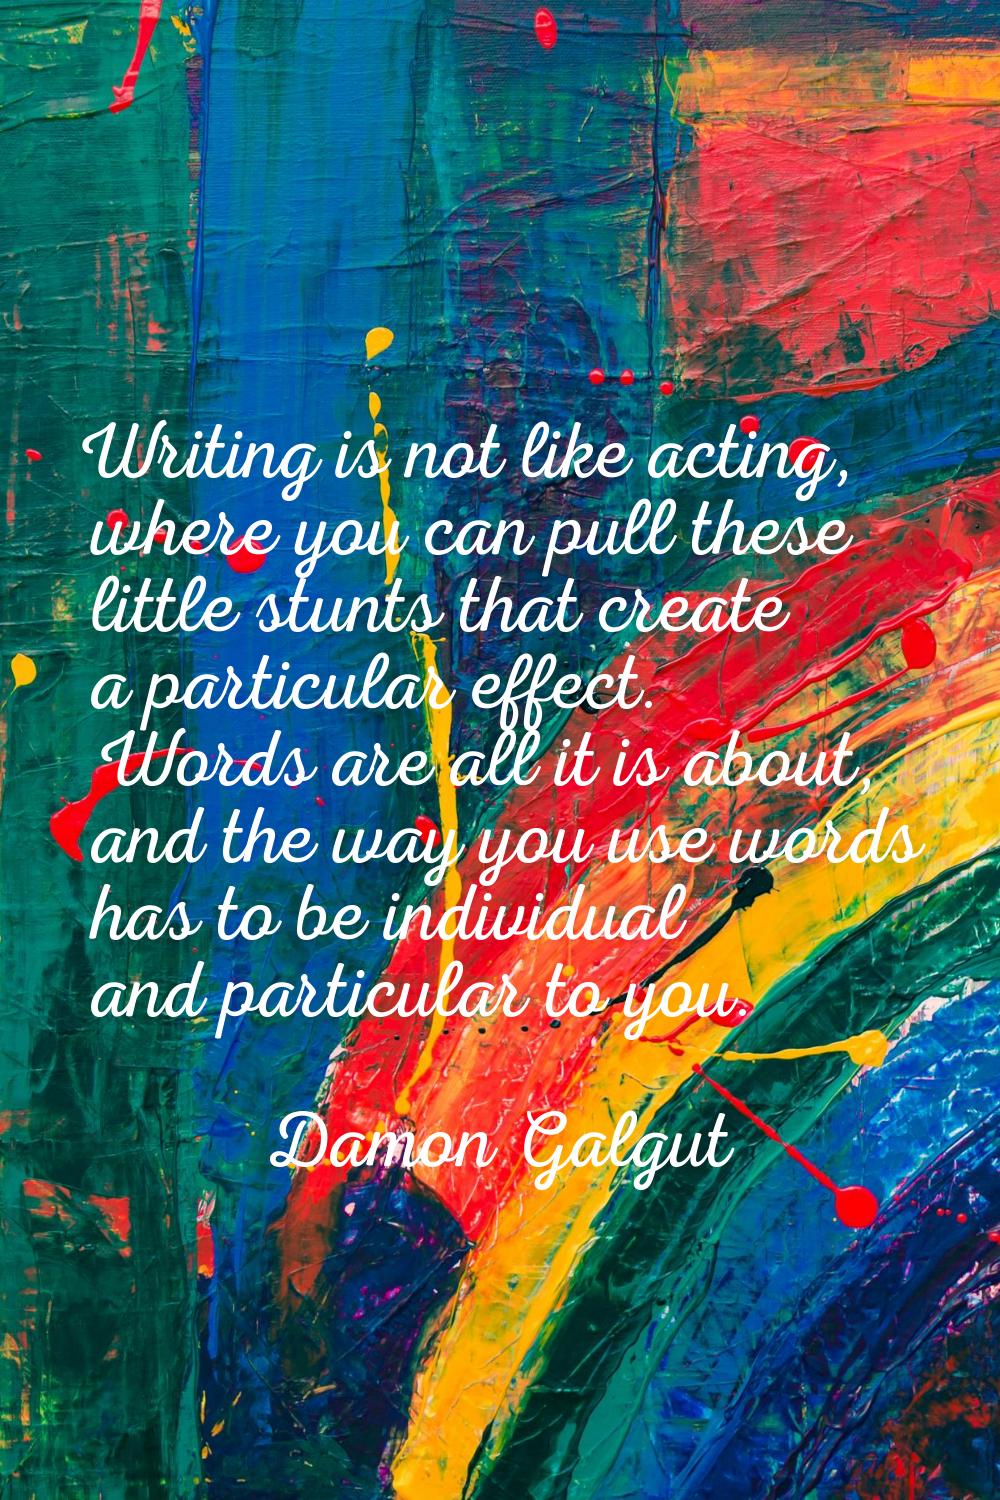 Writing is not like acting, where you can pull these little stunts that create a particular effect.